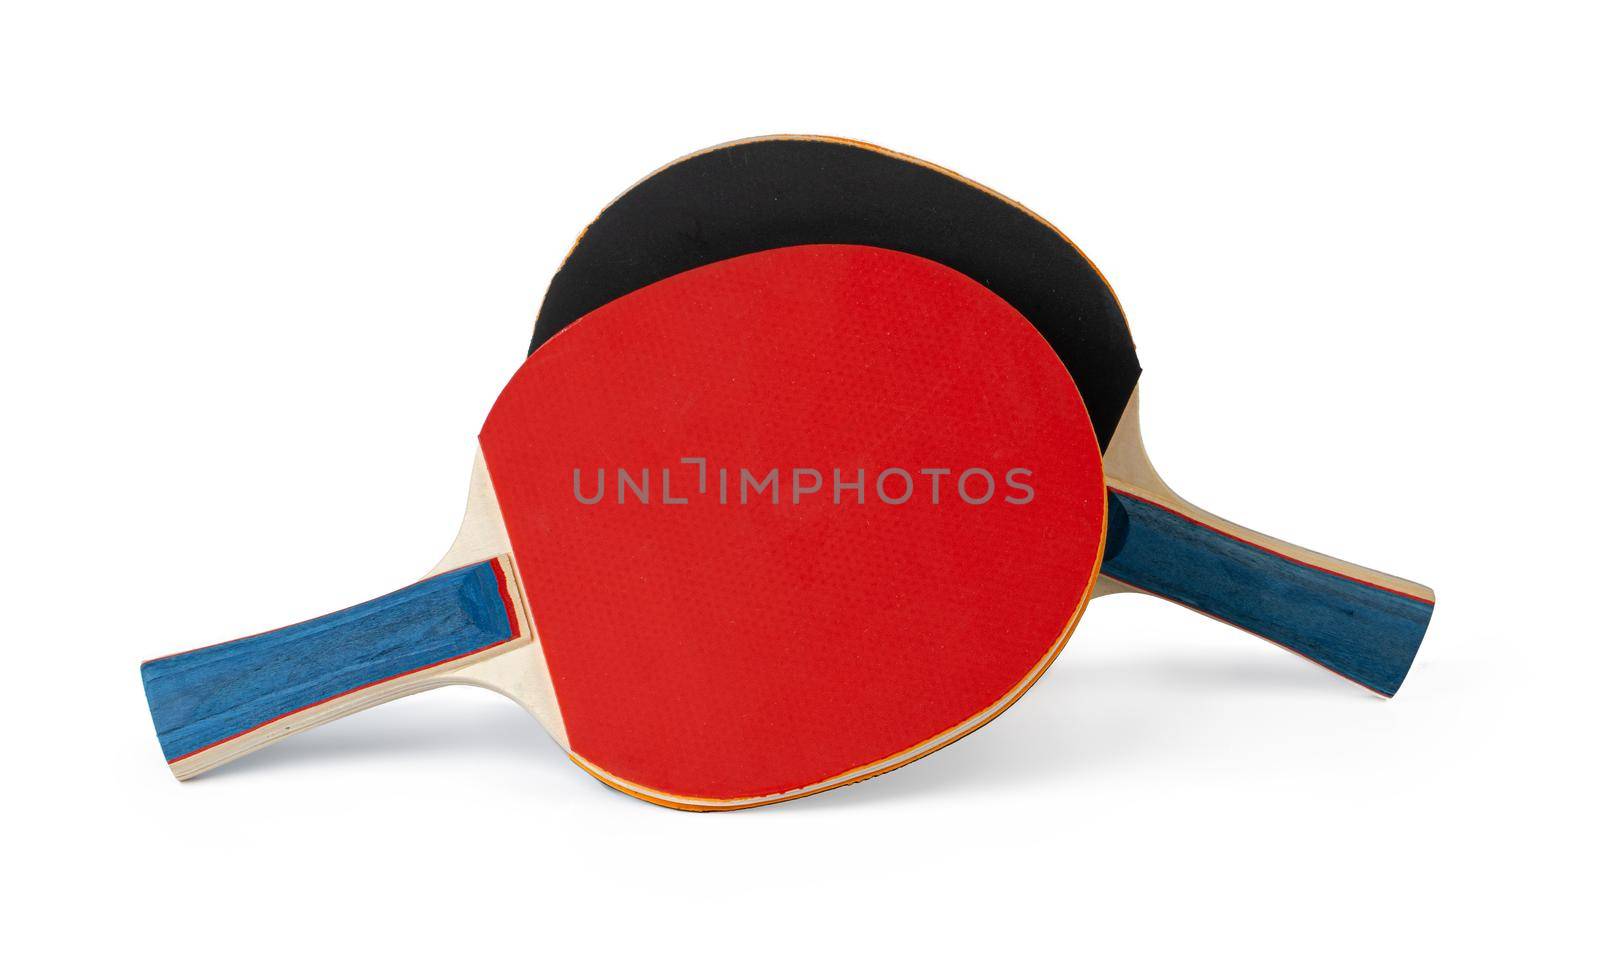 Two ping pong rackets isolated on white background by Fabrikasimf